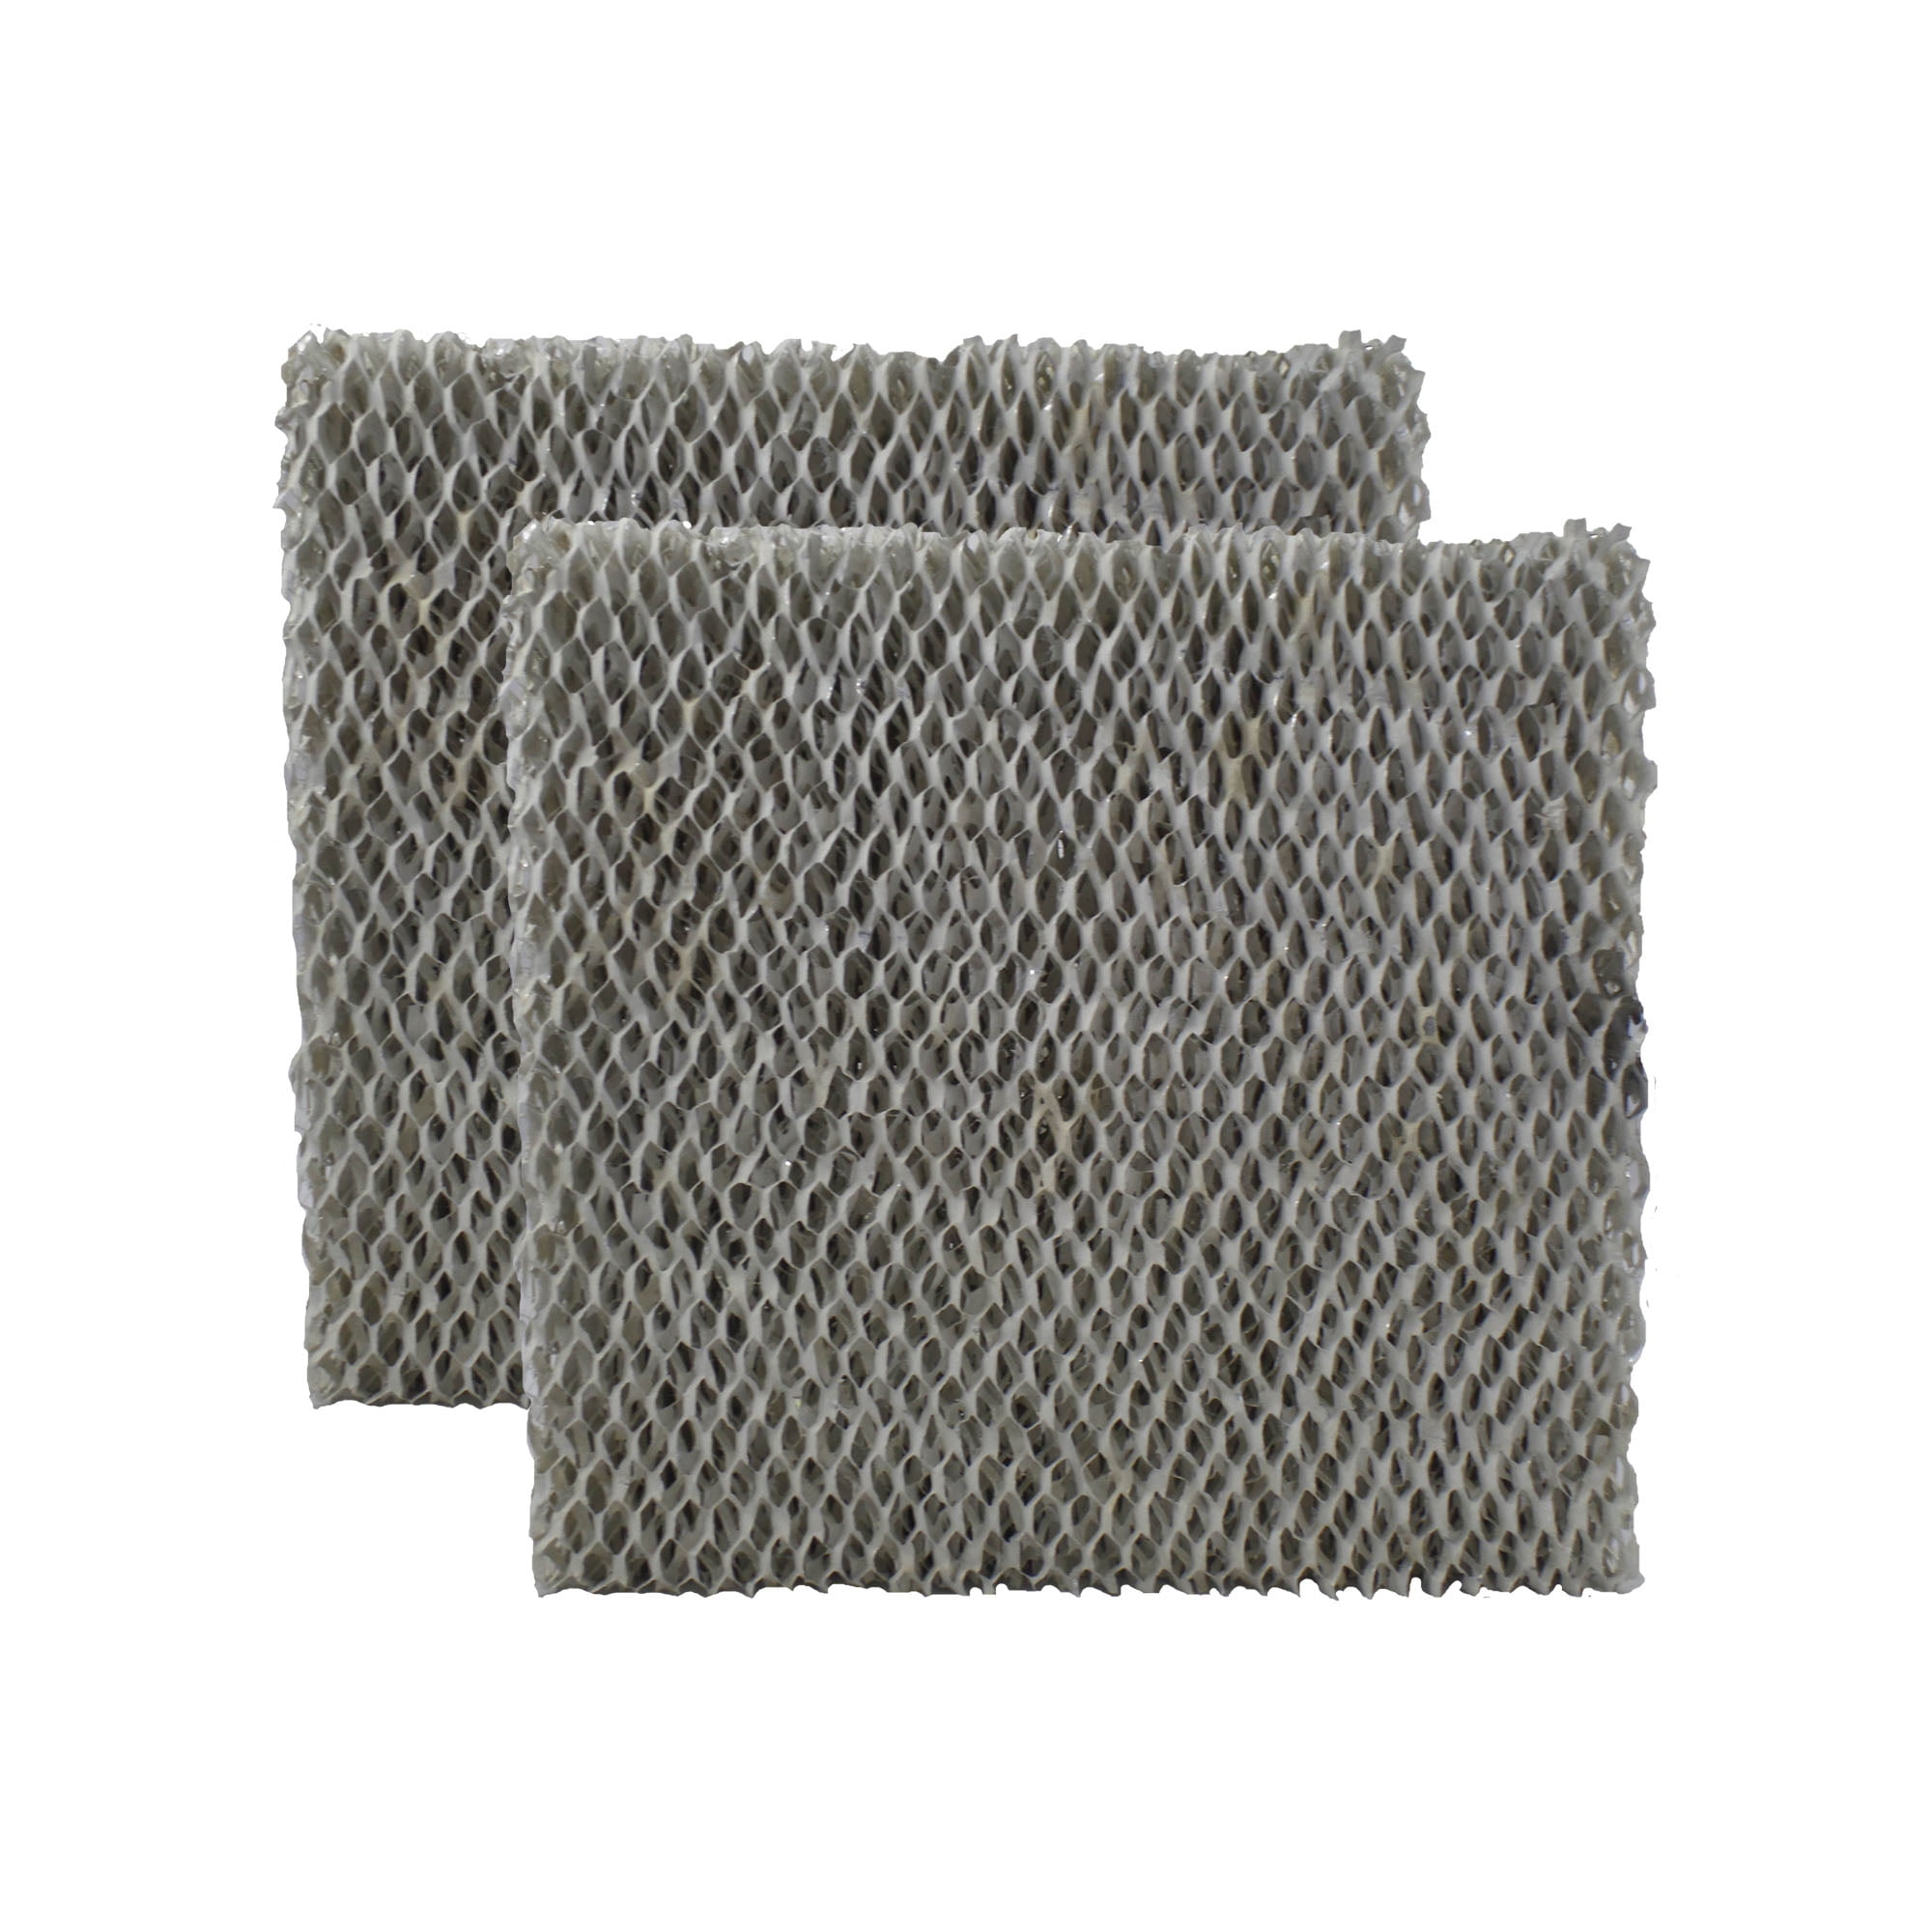 Whole House Humidifier Filter Pad for Aprilaire 350 360 400  6-Pack